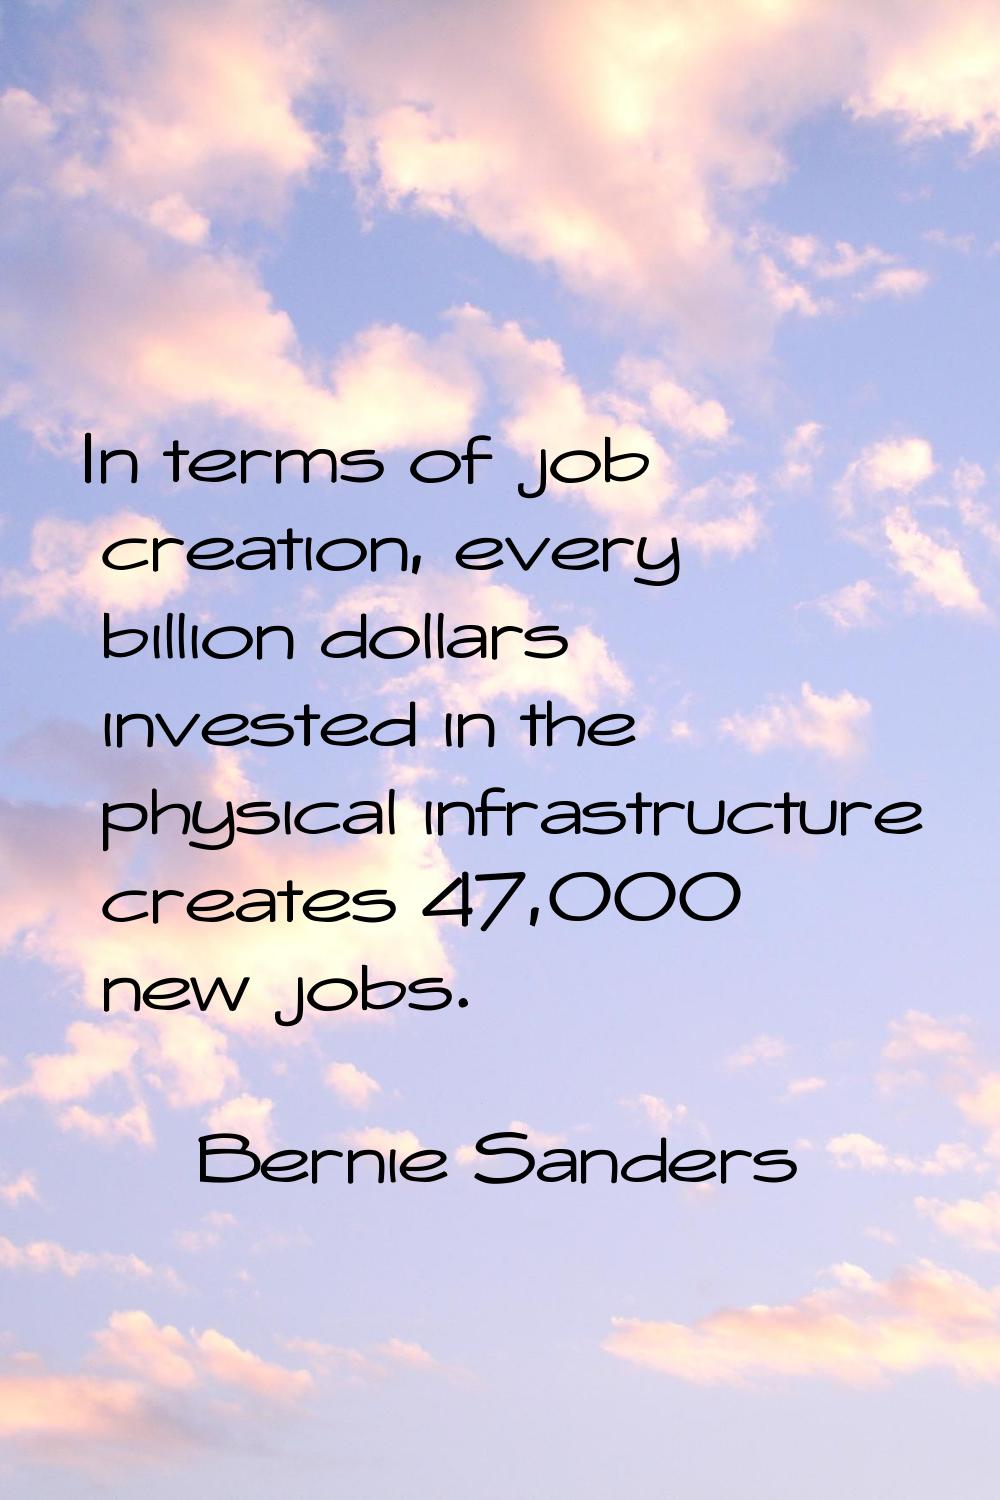 In terms of job creation, every billion dollars invested in the physical infrastructure creates 47,